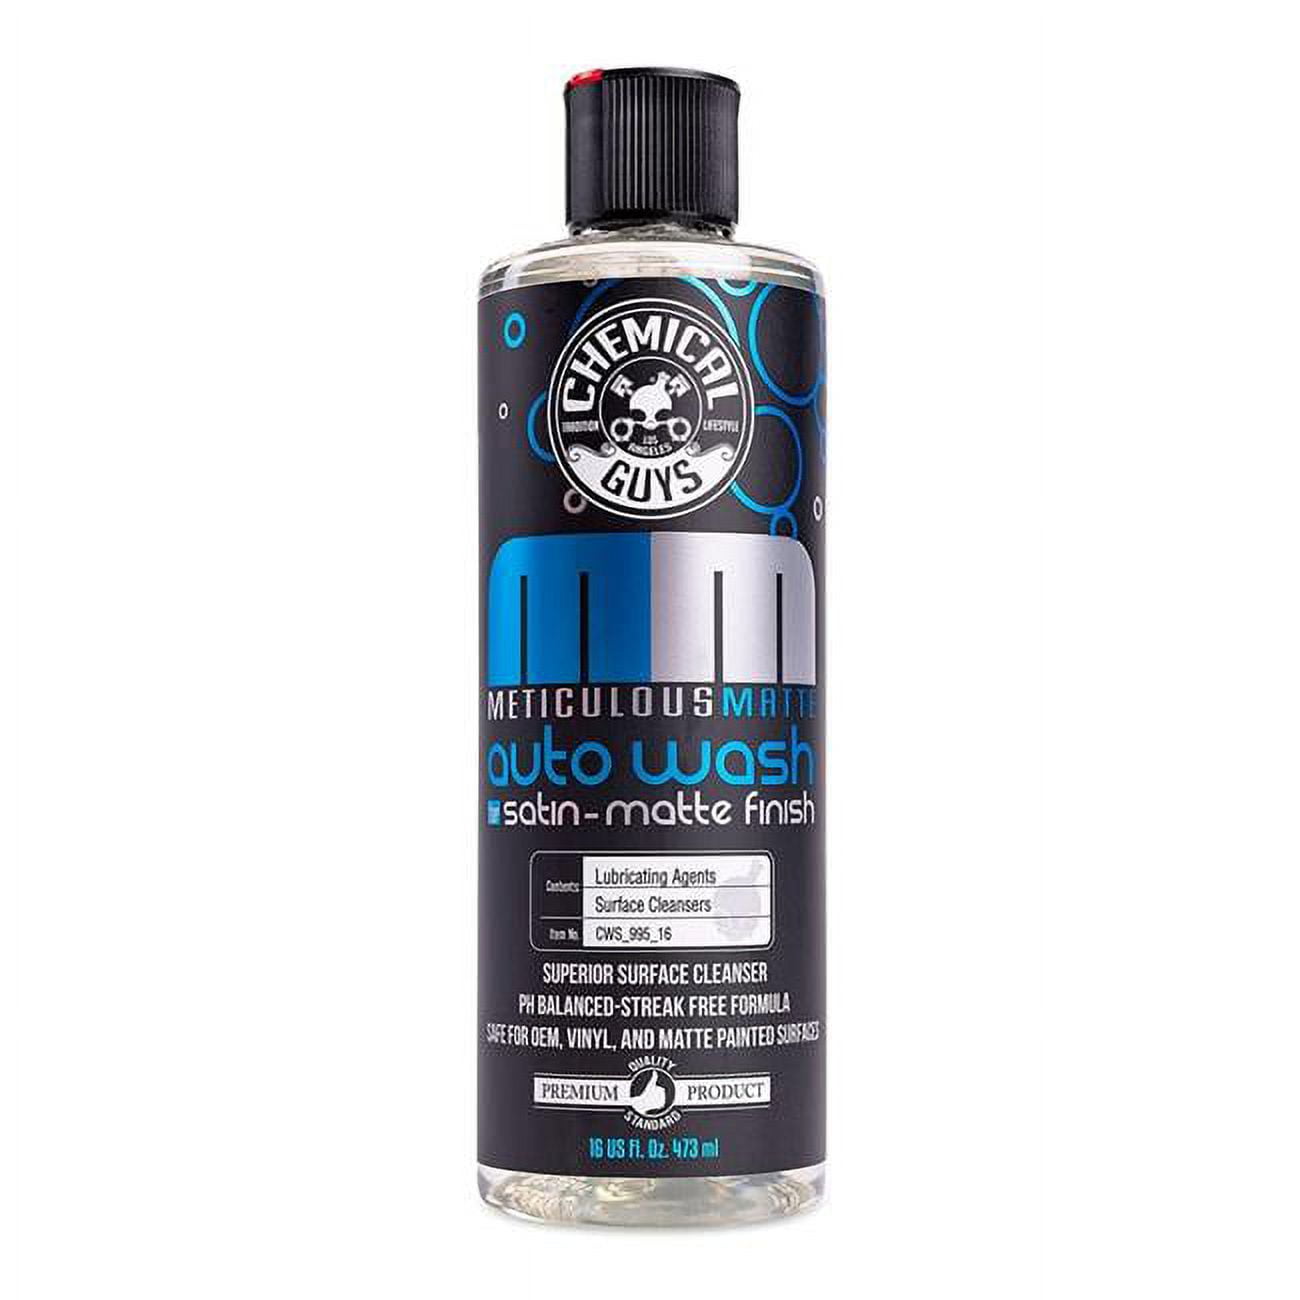 Buy chemical guy car cleaner Online in KUWAIT at Low Prices at desertcart